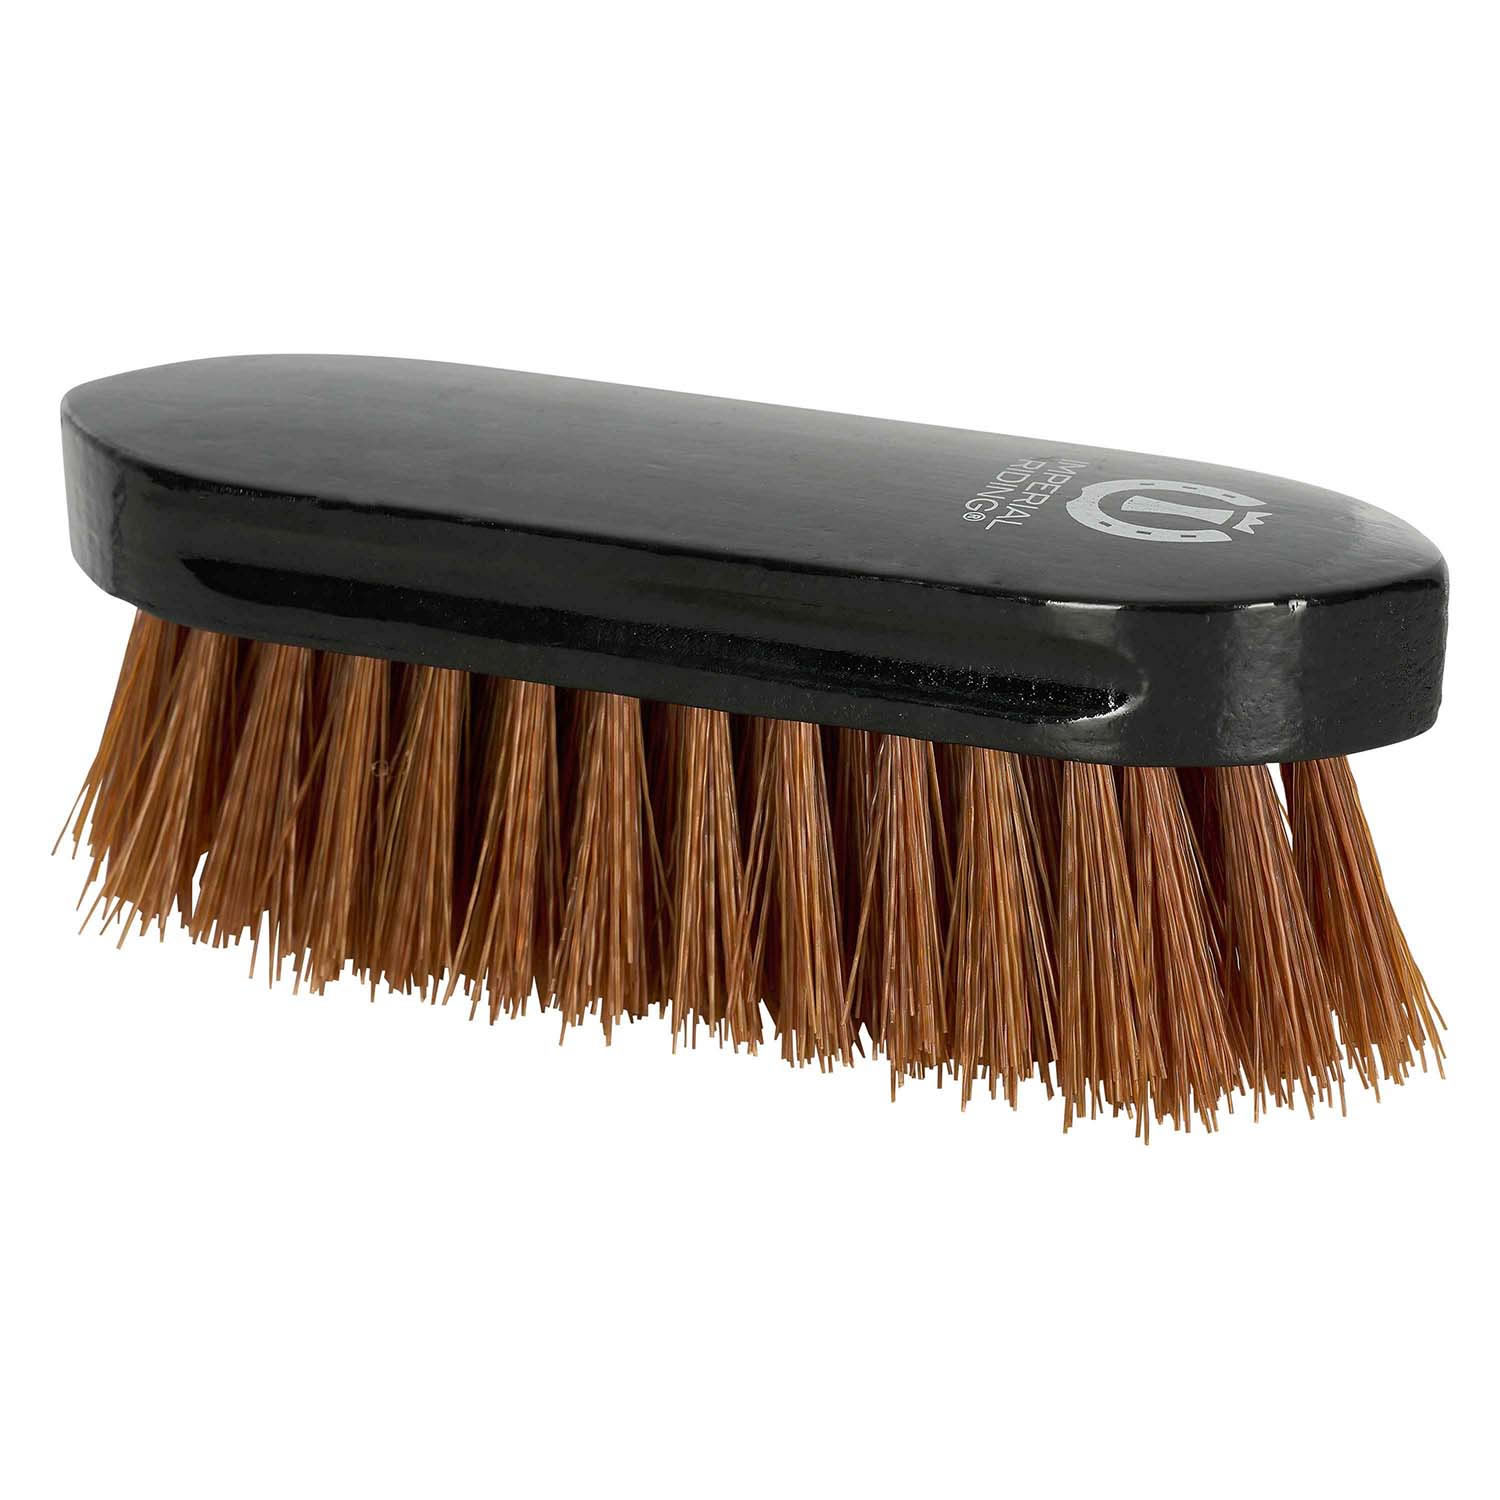 IMPERIAL RIDING DANDY BRUSH HARD WITH WOODEN BACK